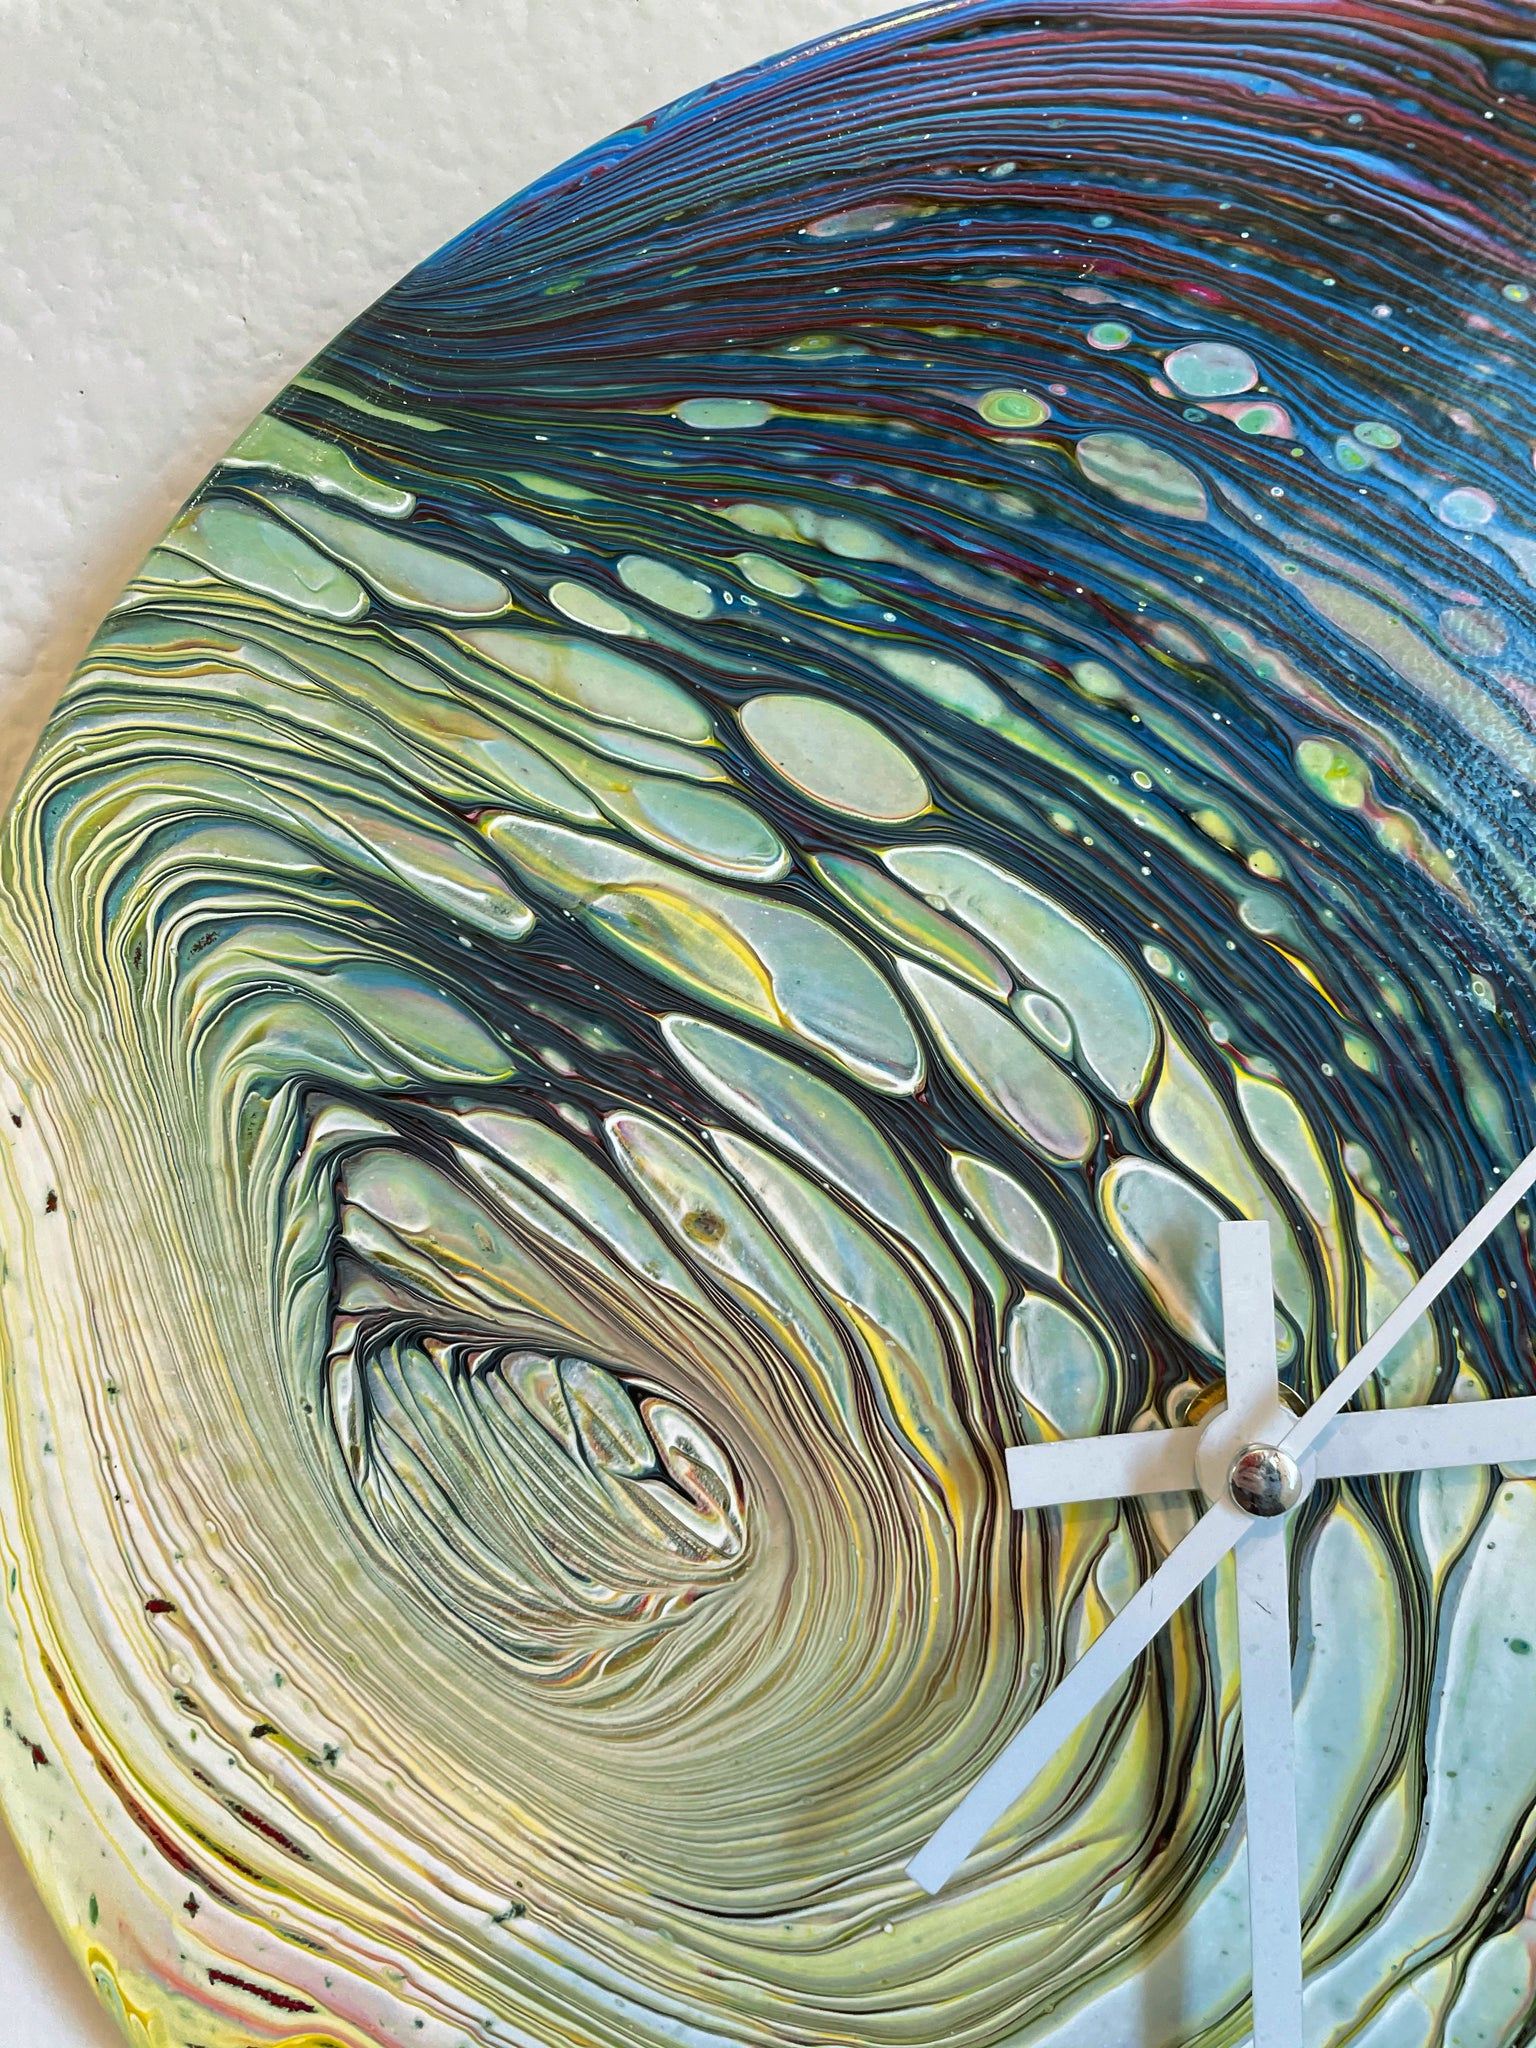 Space Needle - Upcycled Vinyl Record Pour Painting Clock